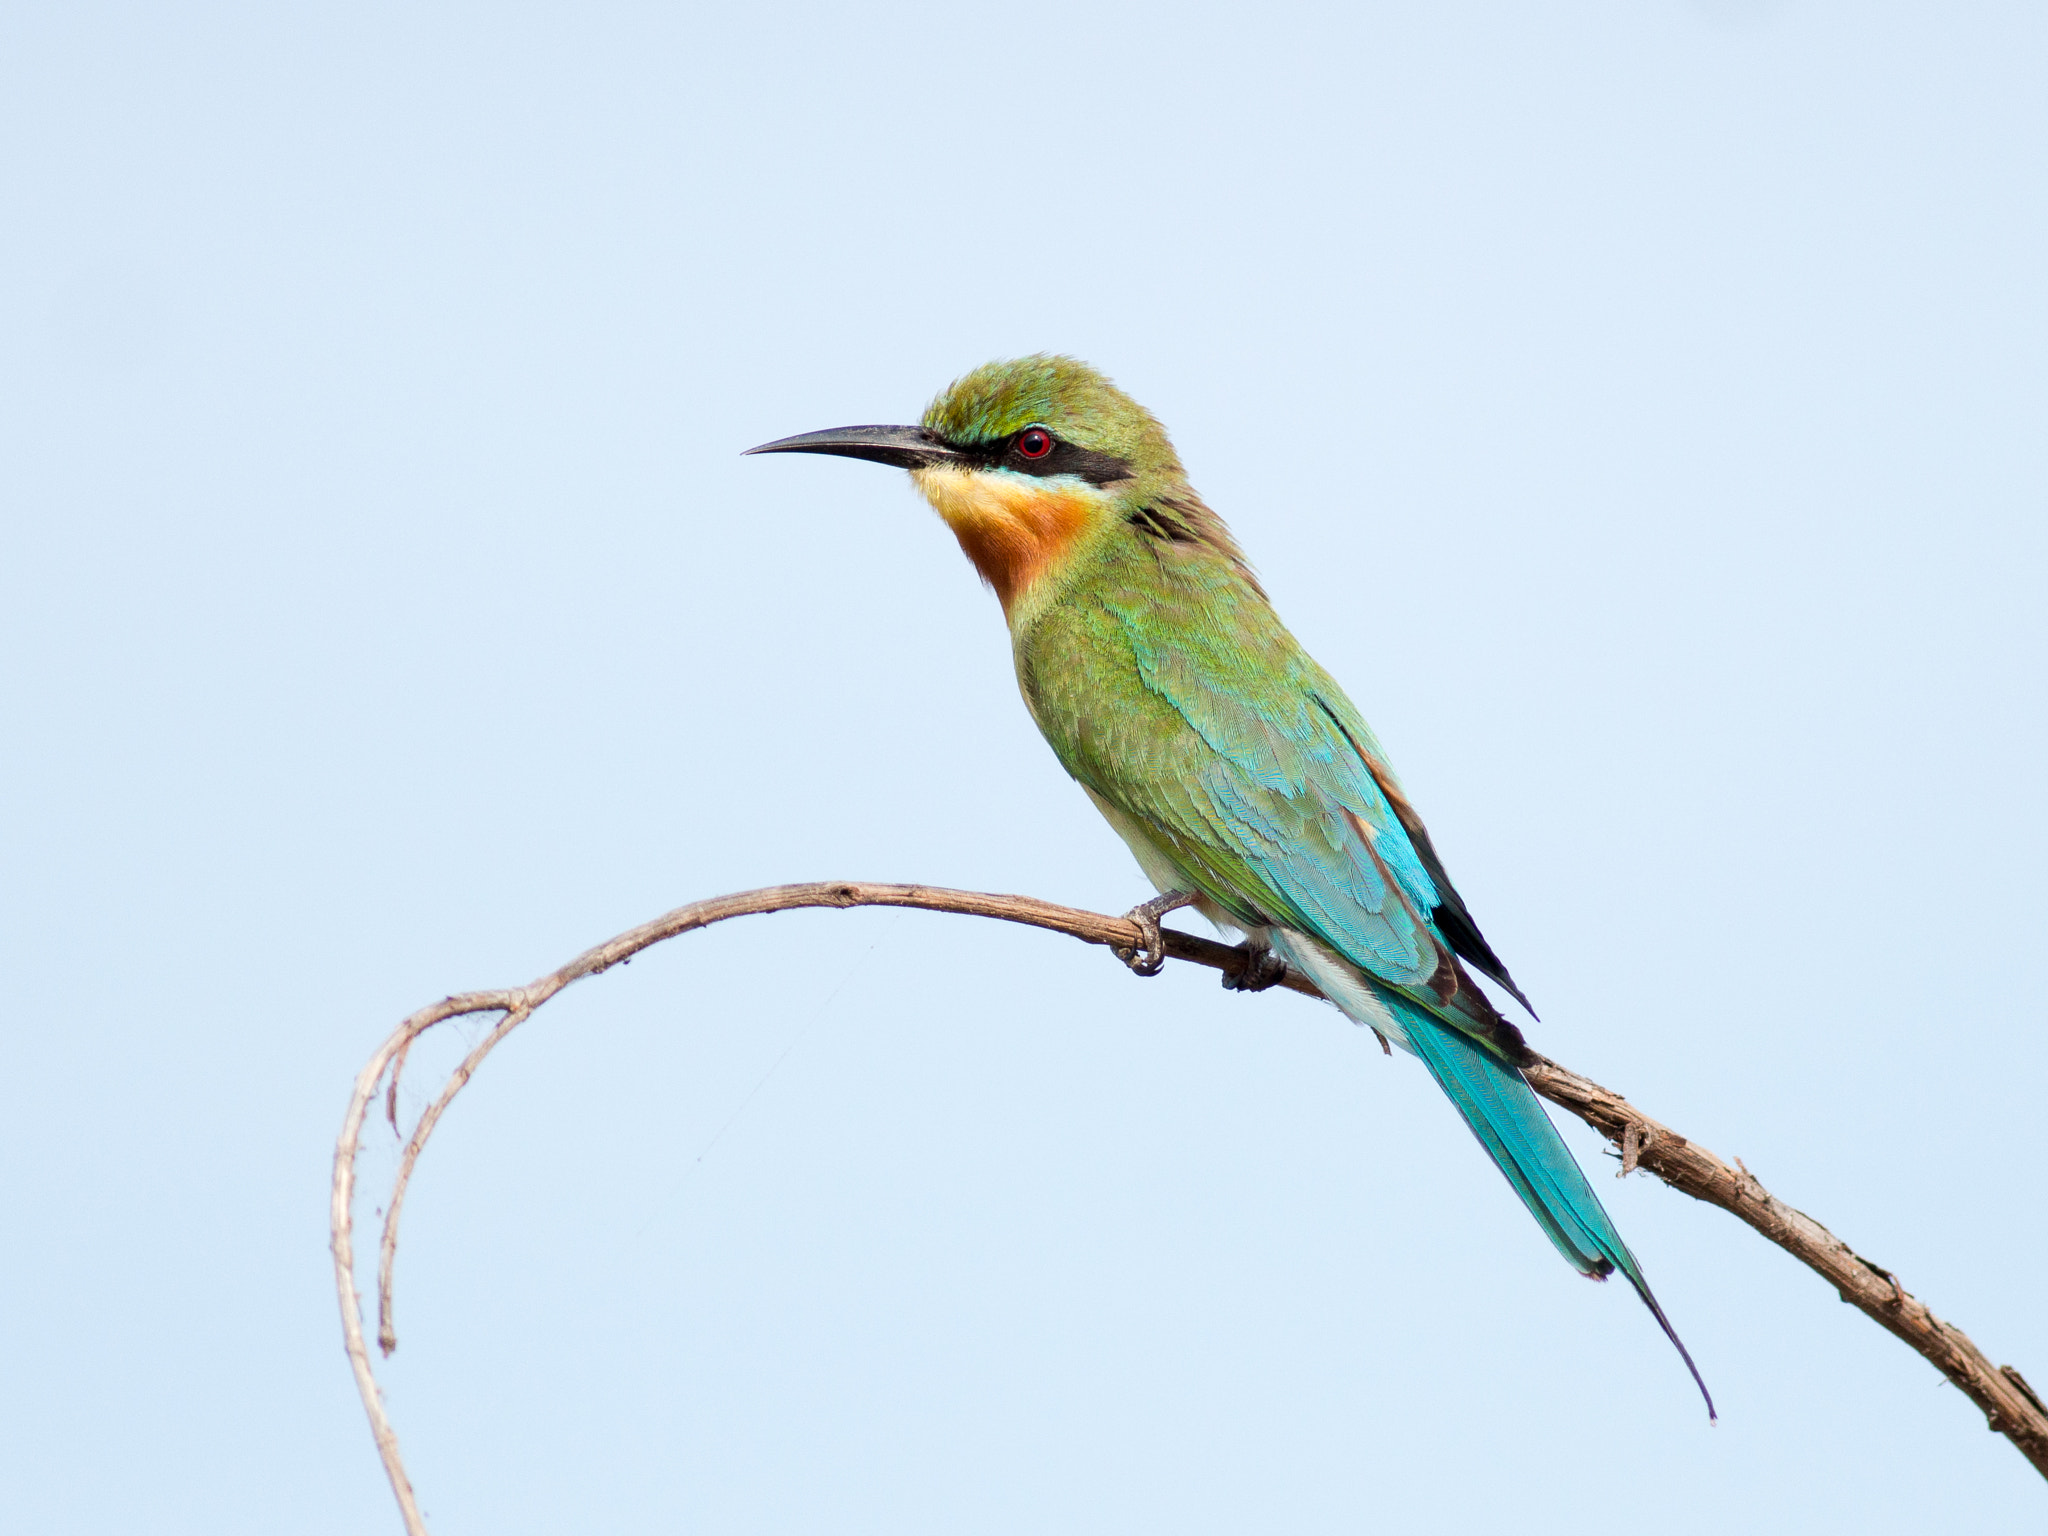 Metabones 400/5.6 sample photo. Blue-tailed bee-eater photography